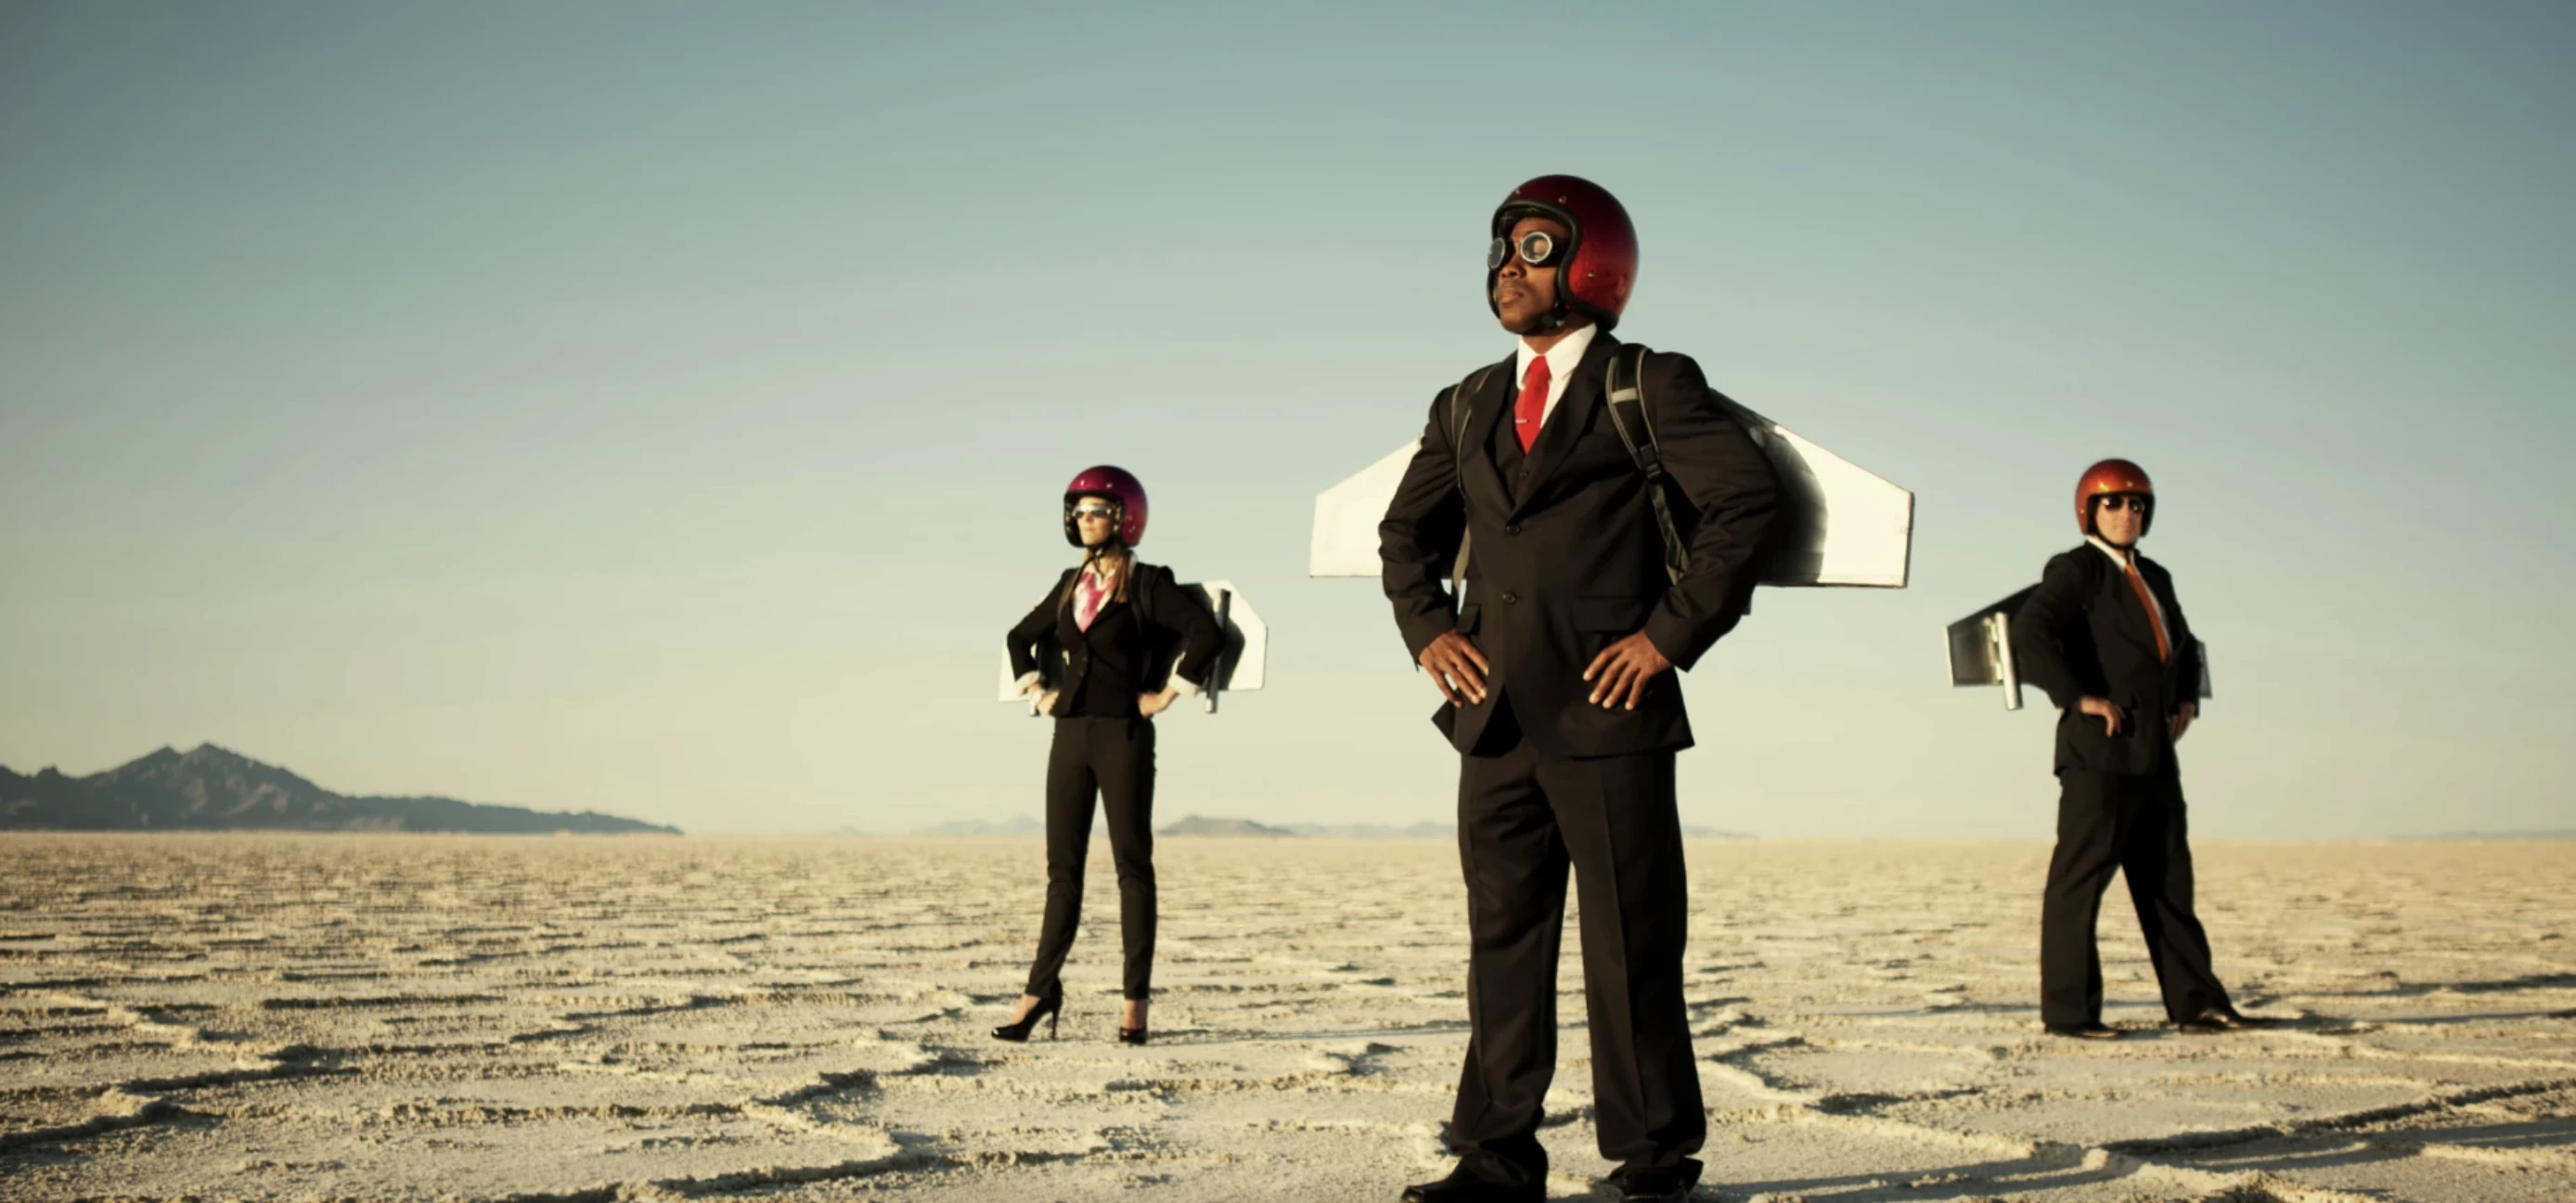 People in suits wearing rocket wings and helmets stand hands on hips looking out in the desert 